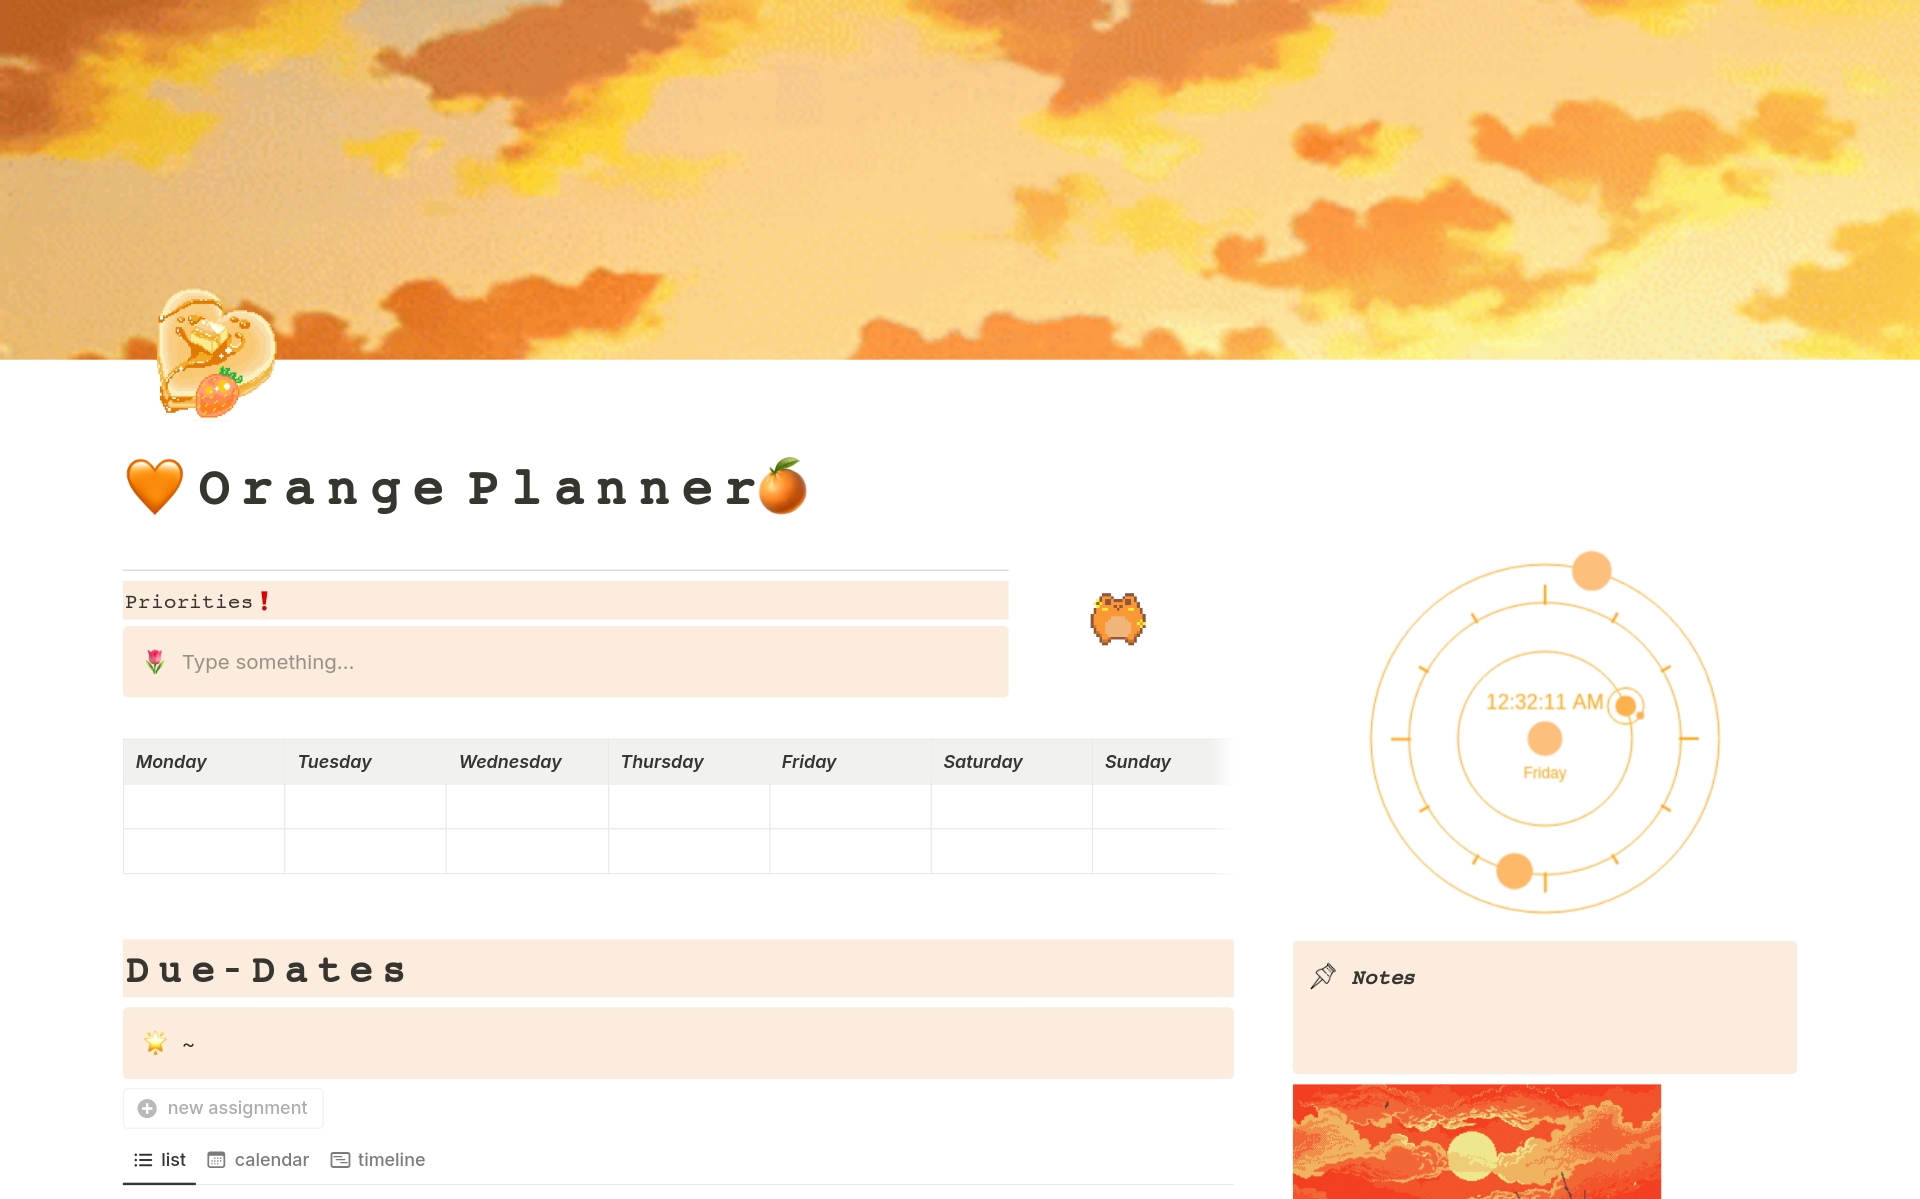 A template preview for 🍊𝙰𝚎𝚜𝚝𝚑𝚎𝚝𝚒𝚌 𝙾𝚛𝚊𝚗𝚐𝚎 𝙿𝚕𝚊𝚗𝚗𝚎𝚛🧡